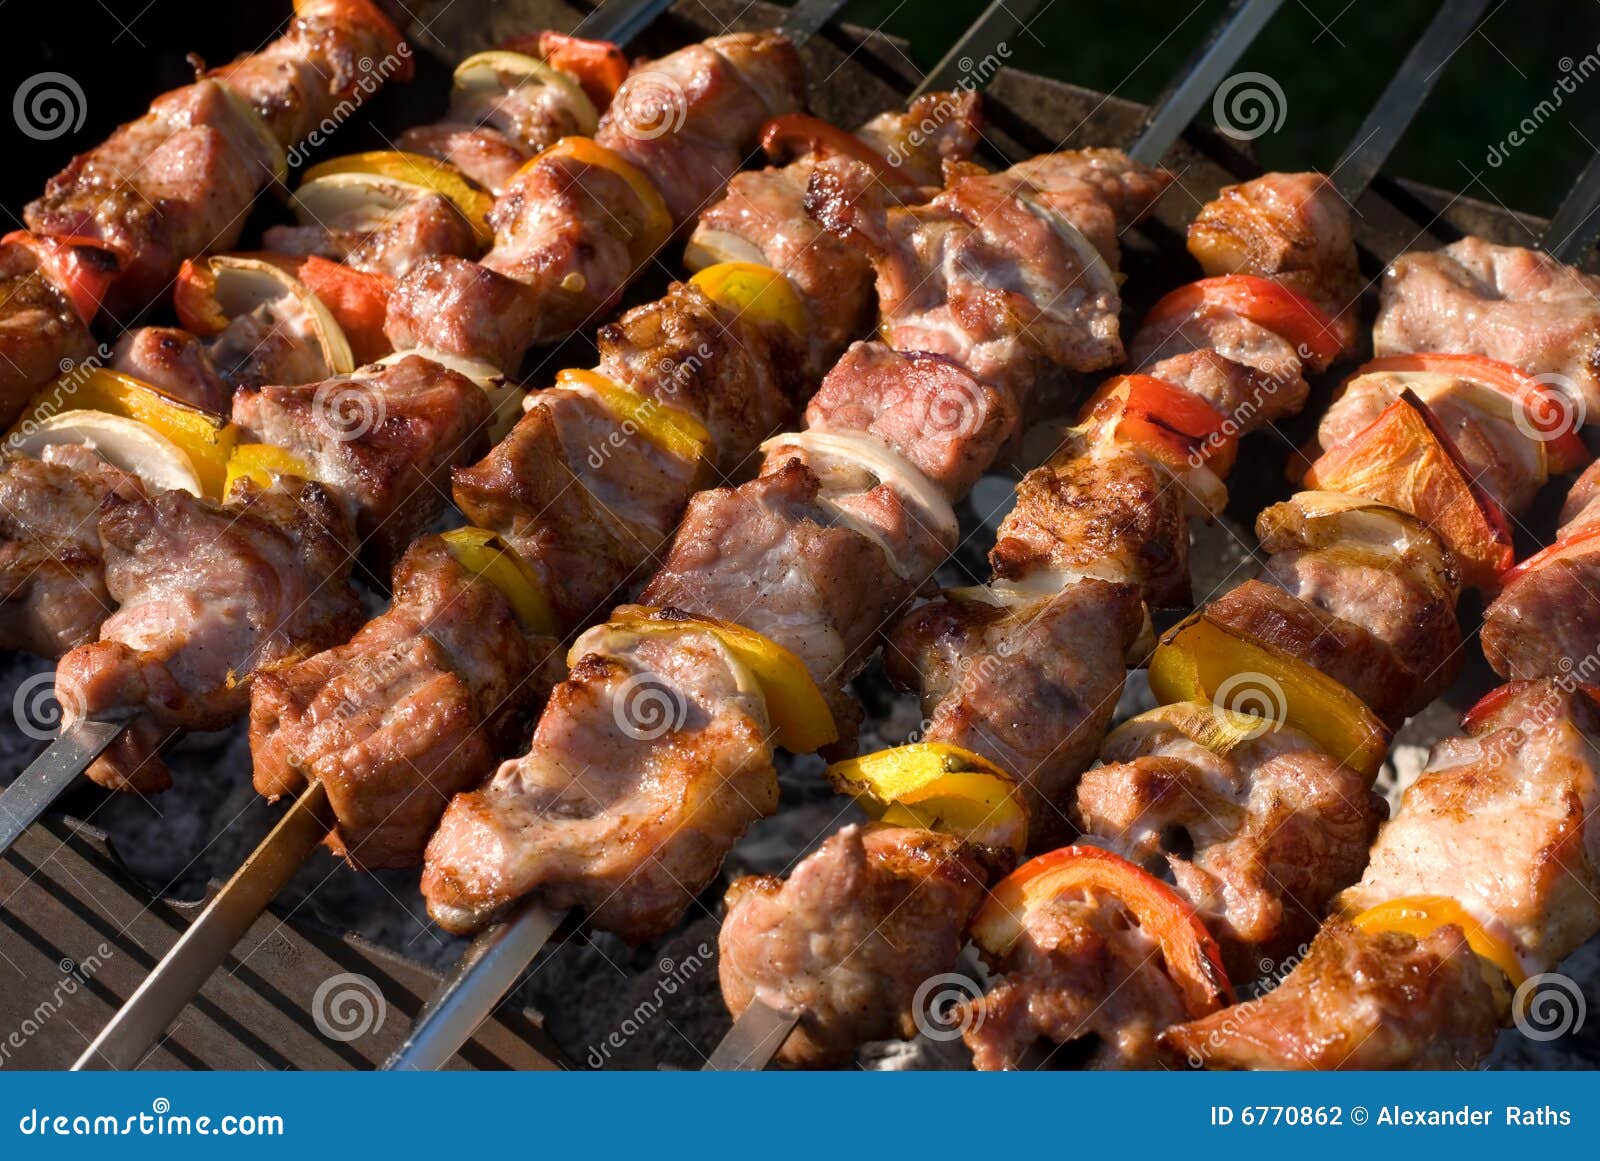 Grilled kabobs stock photo. Image of barbecue, meat, lunch - 6770862